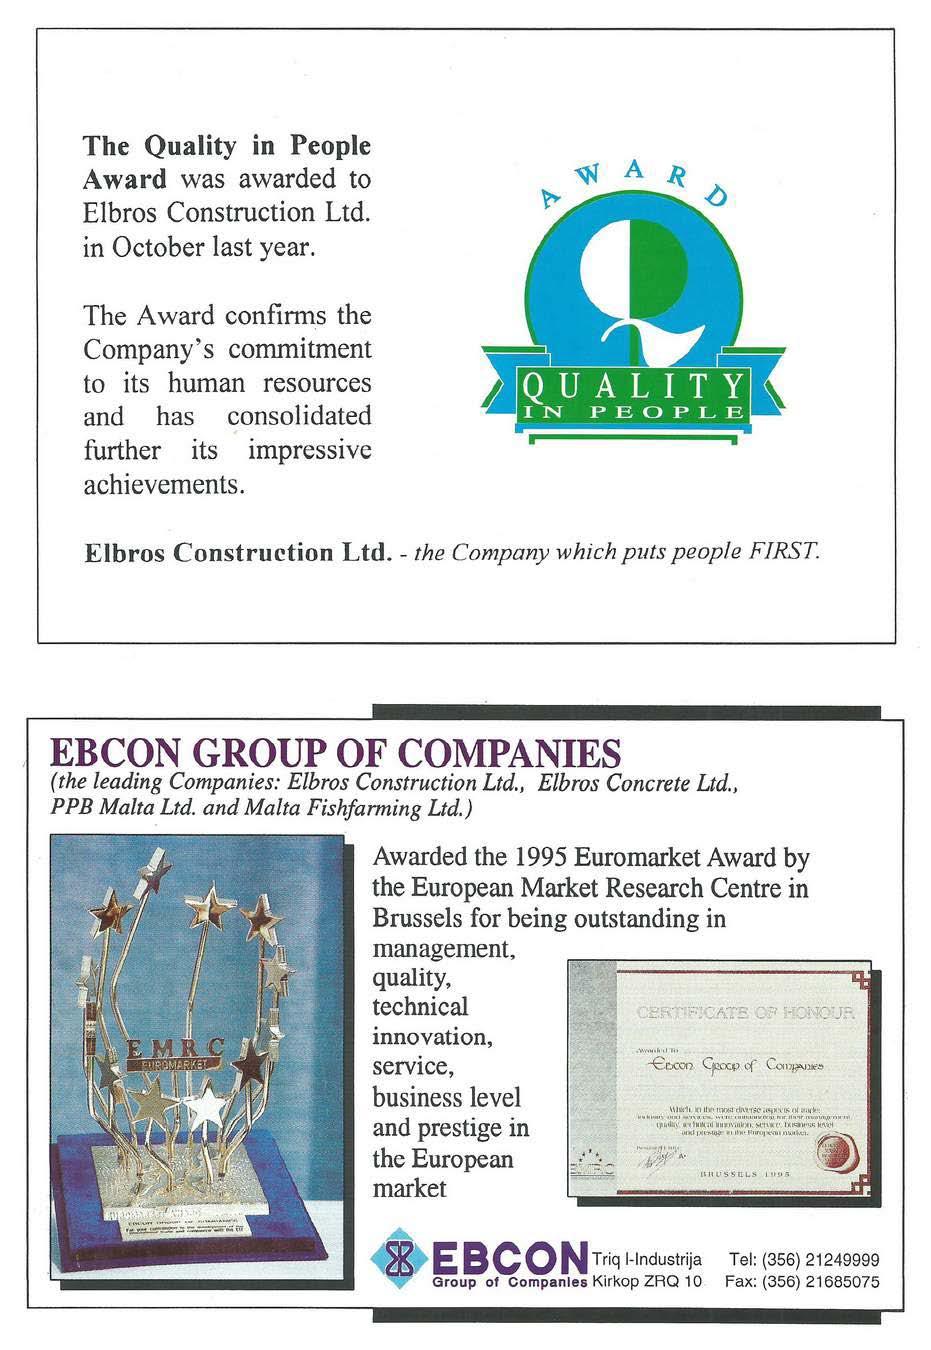 The Quality in People Award was awarded to Elbros Construction Ltd. in October last year.